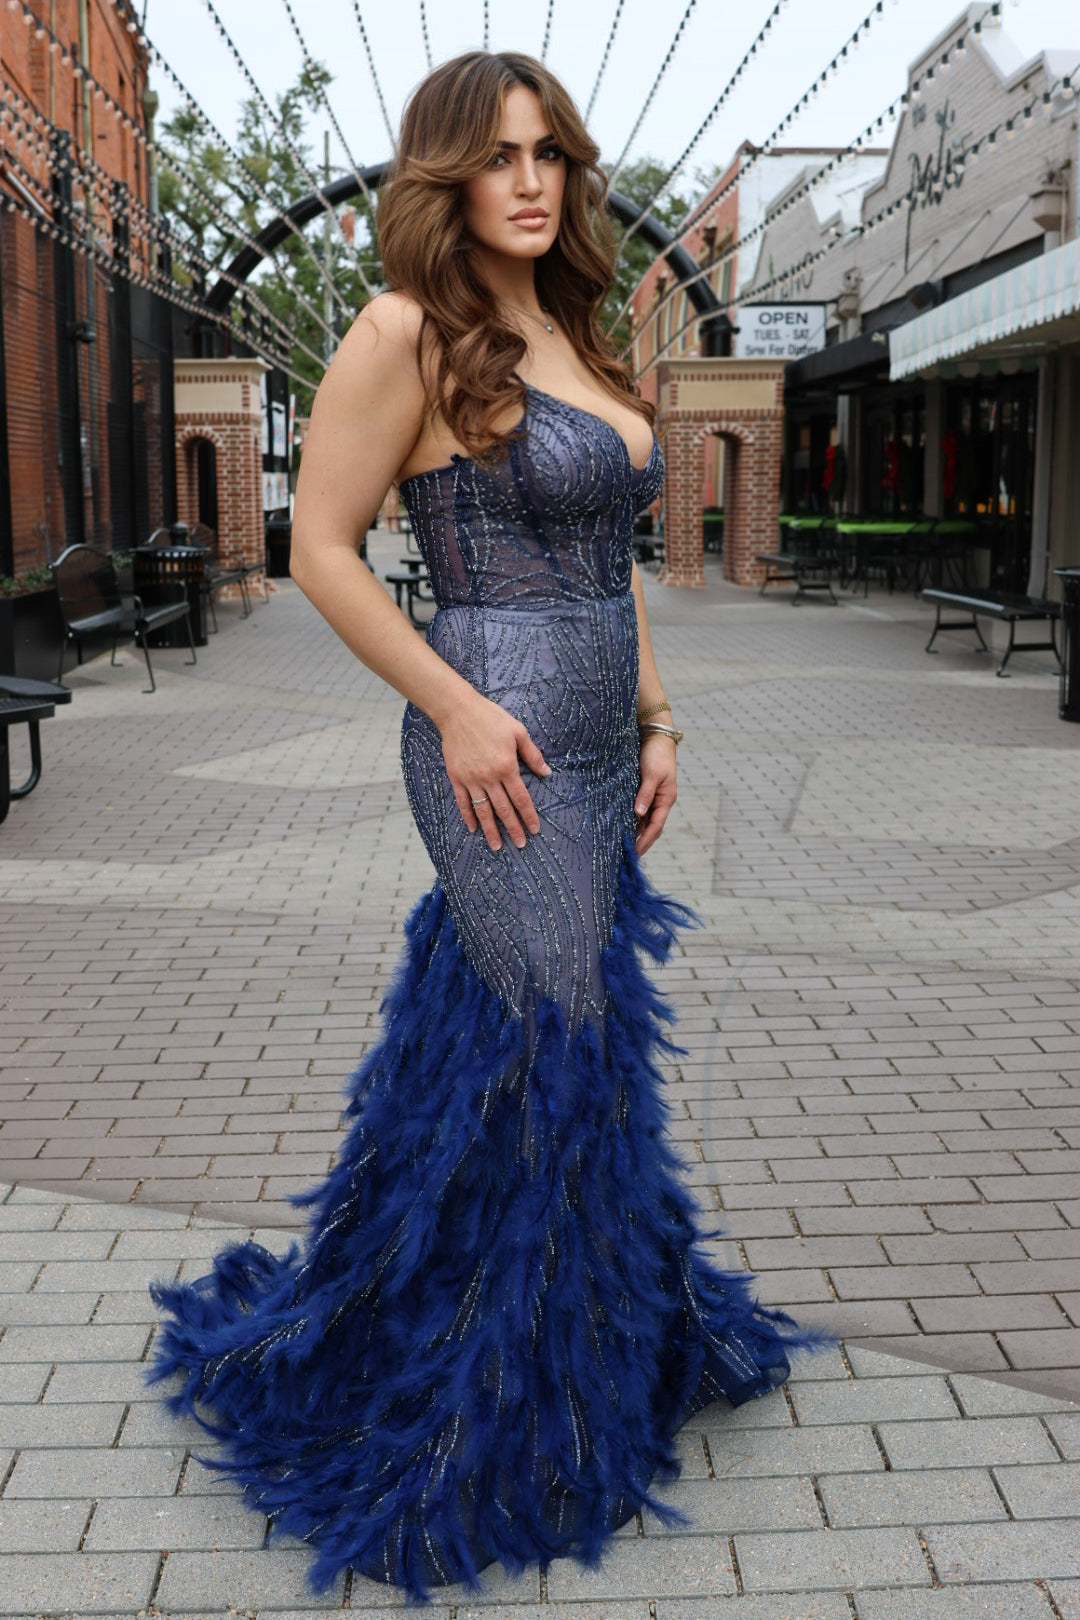 Katalia Embellished & Feathered Mermaid Gown-Formal Gowns-17 young dress-Shop with Bloom West Boutique, Women's Fashion Boutique, Located in Houma, Louisiana